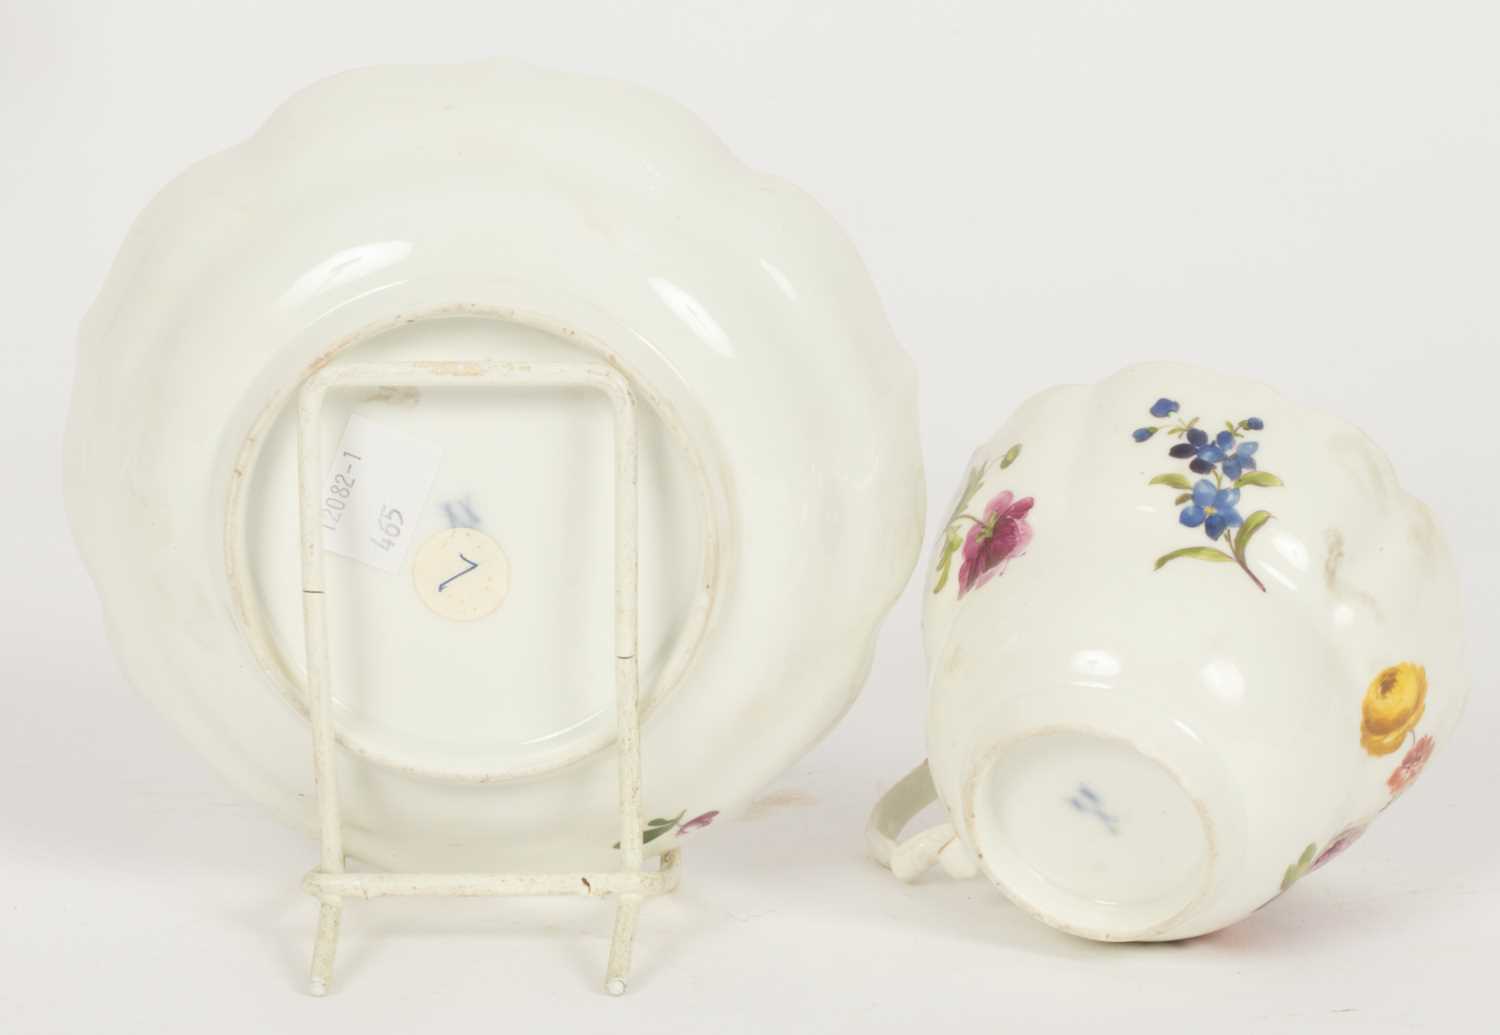 Two Meissen ogee bowls and a saucer - Image 3 of 3